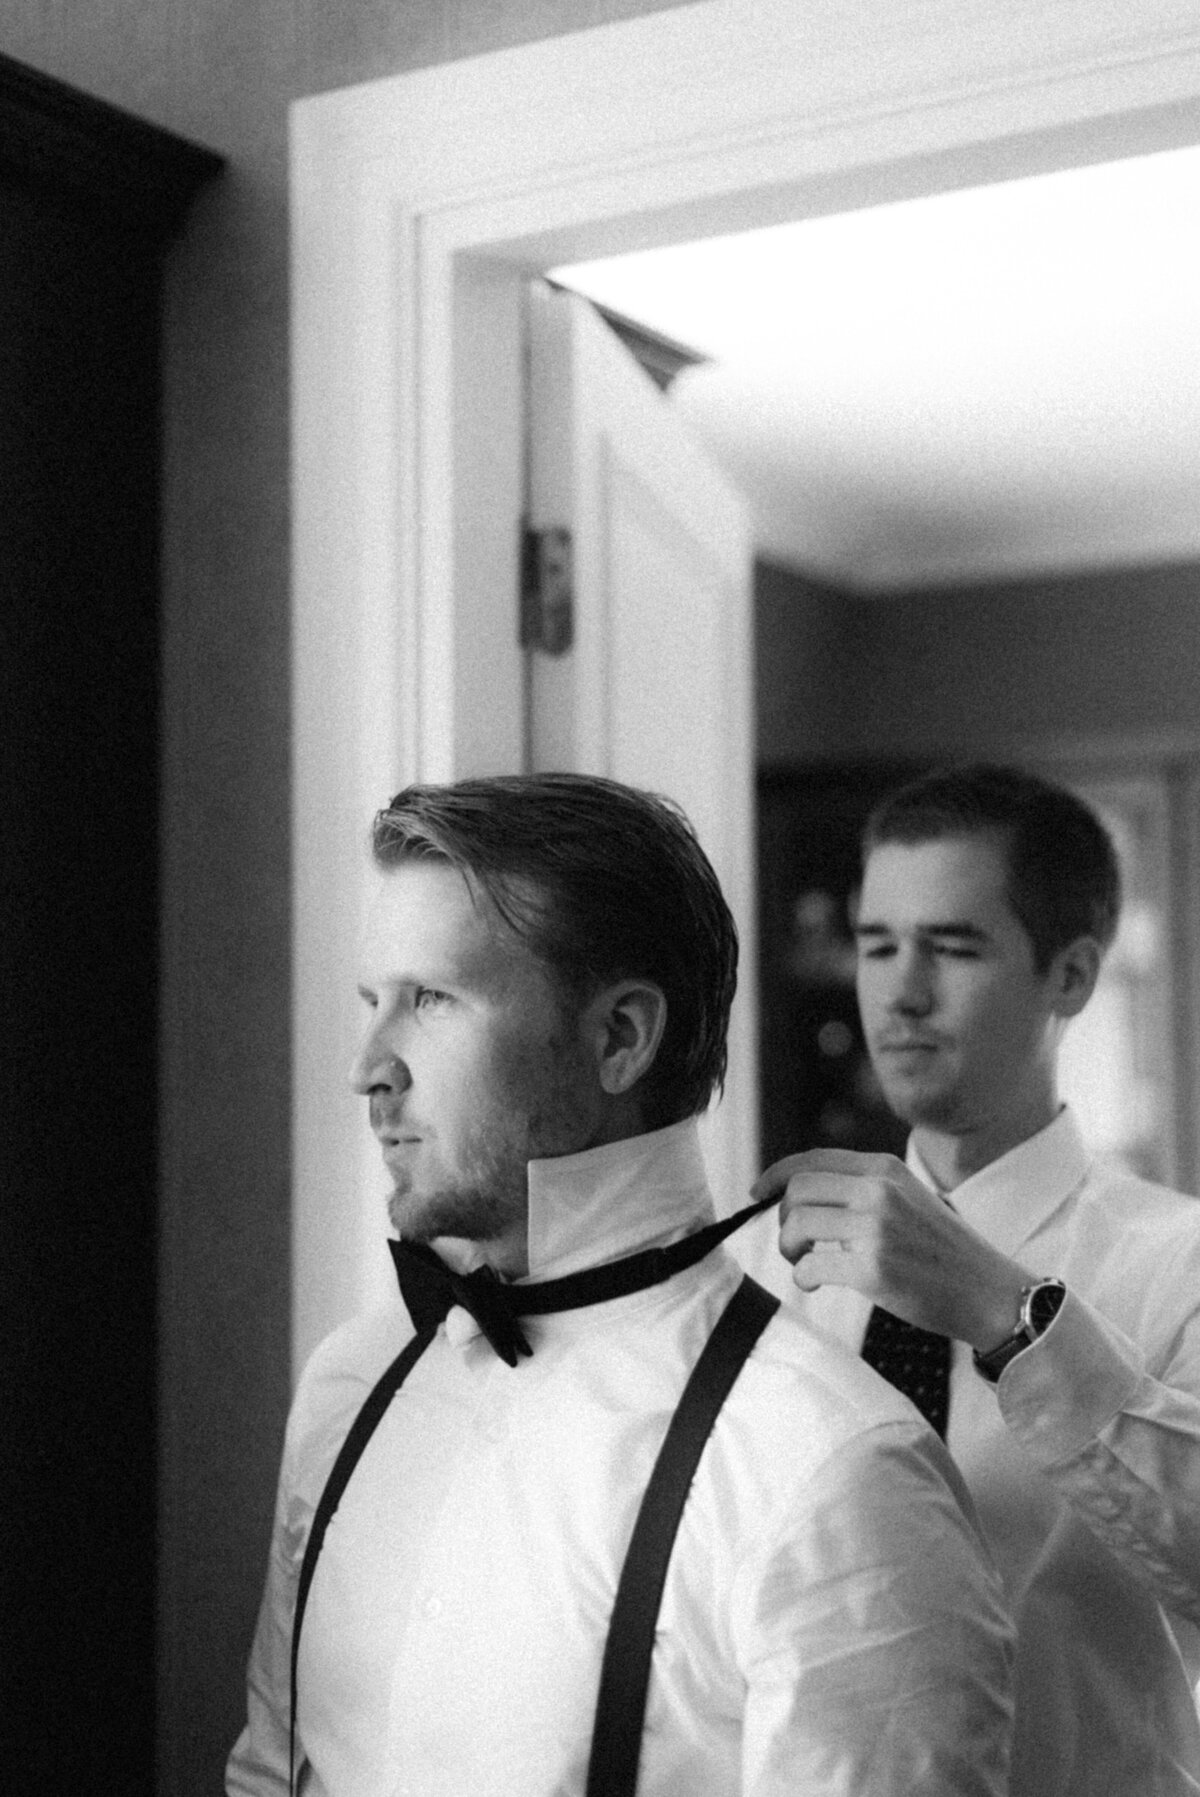 The bestman is helping the groom to put on the bowtie in an image captured by wedding photographer Hannika Gabrielsson.